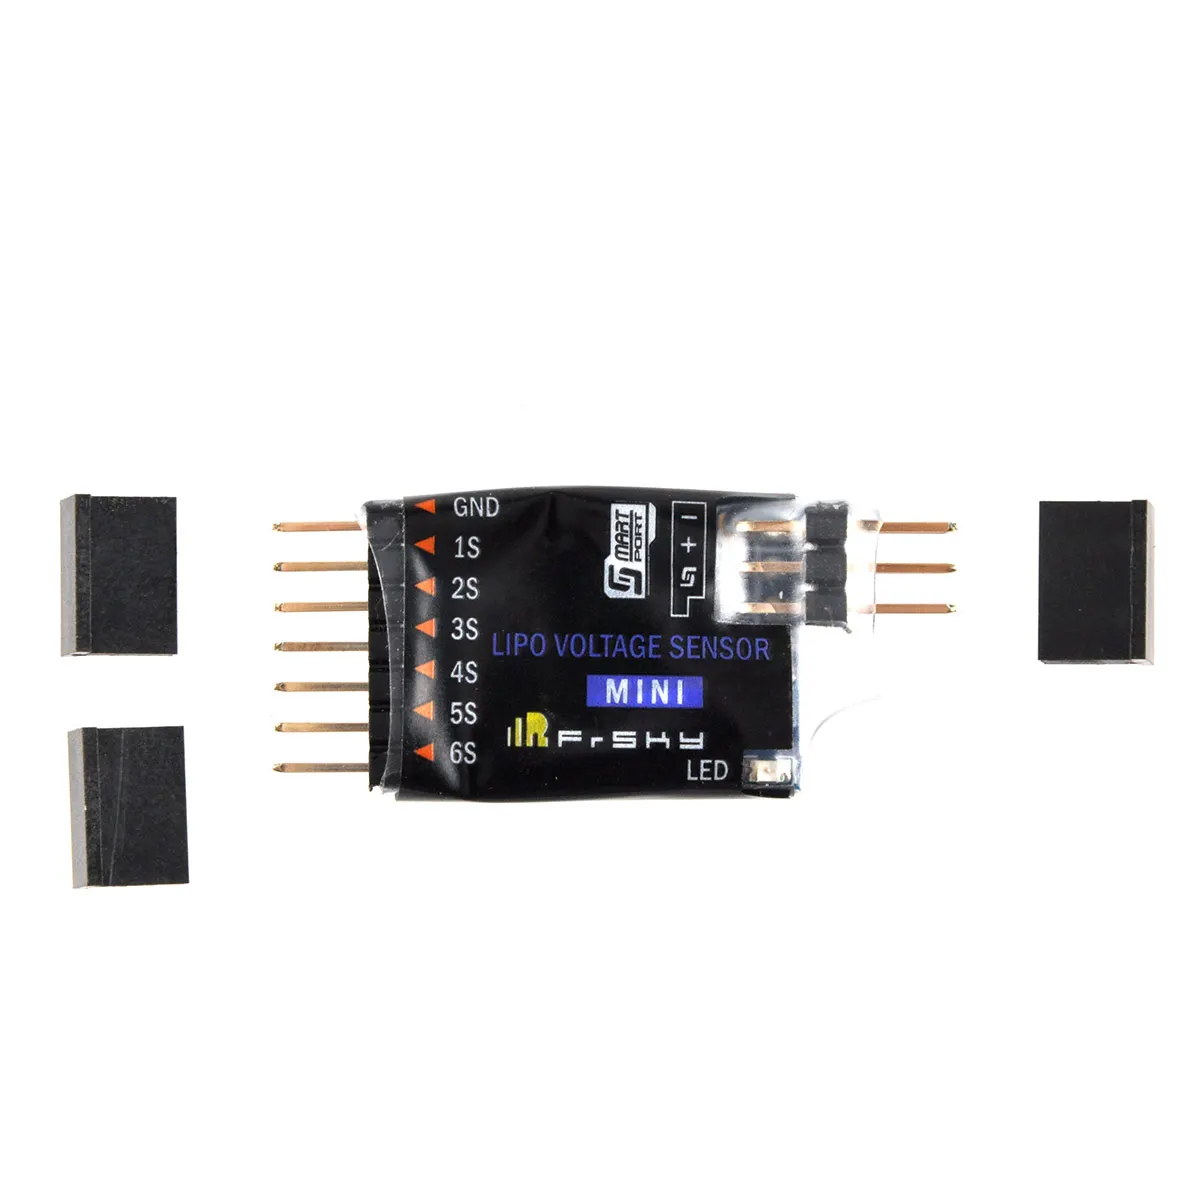 

1 Pc High Quality FrSky MLVSS Mini Lipo Voltage Sensor Smart Port Enable without OLED Screen